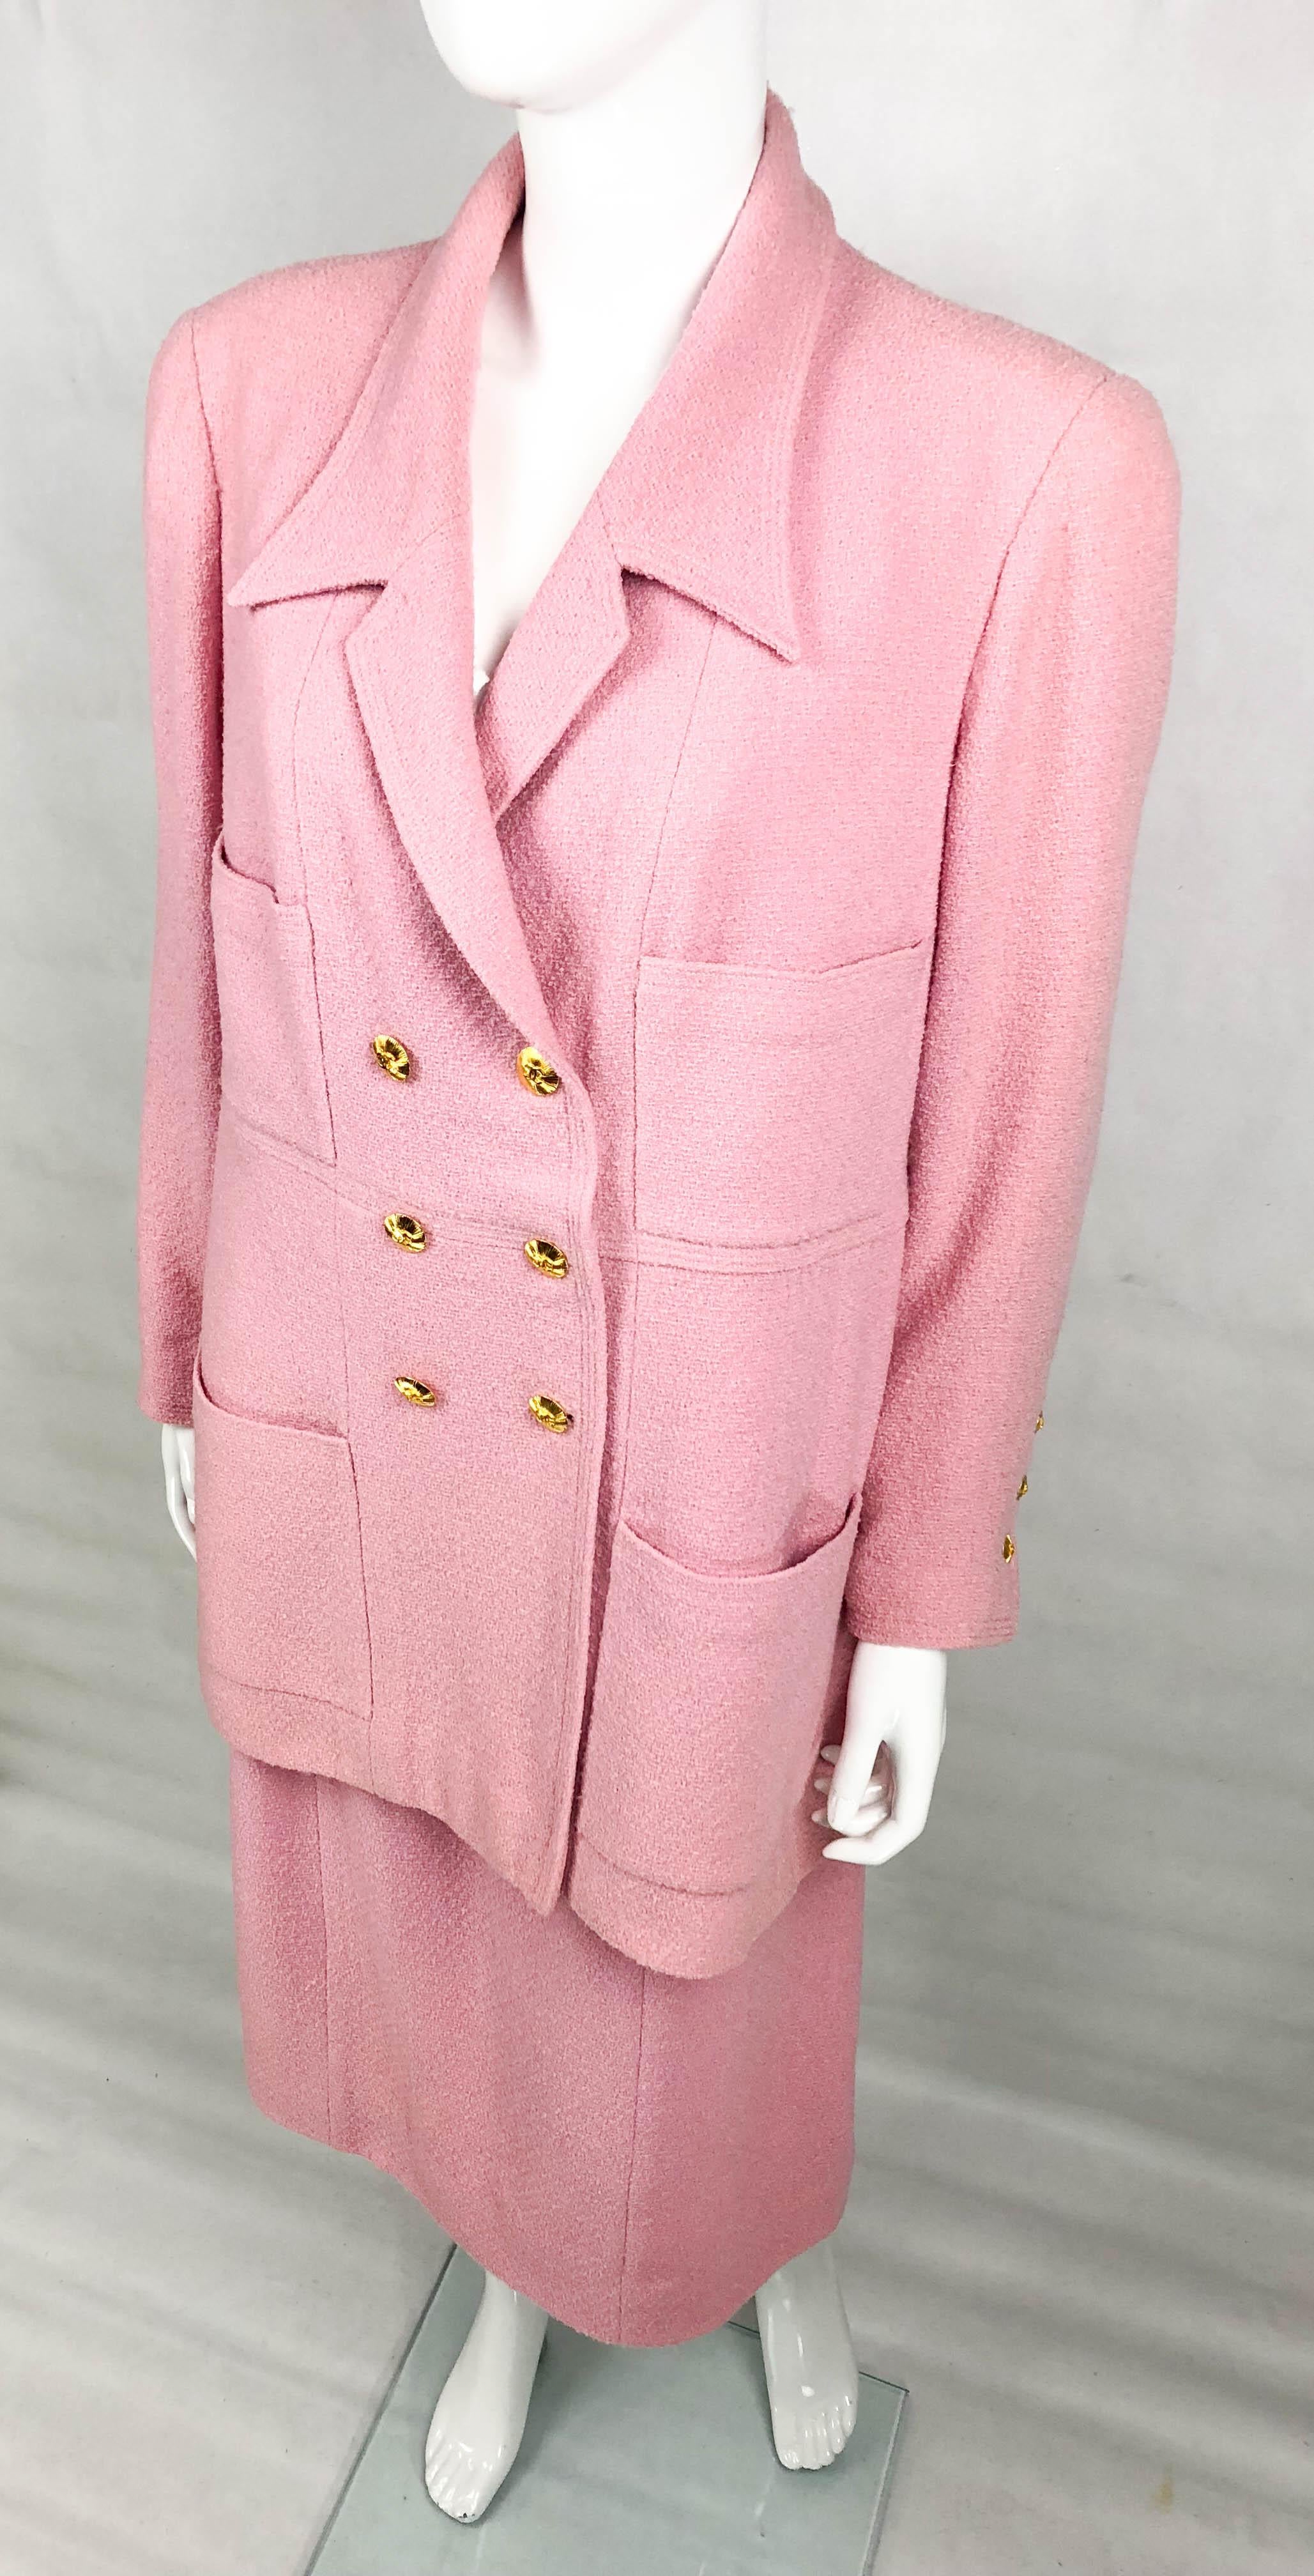 1996 Chanel Pink Wool Skirt Suit With Gilt Logo Buttons (Large Size) In Excellent Condition For Sale In London, Chelsea